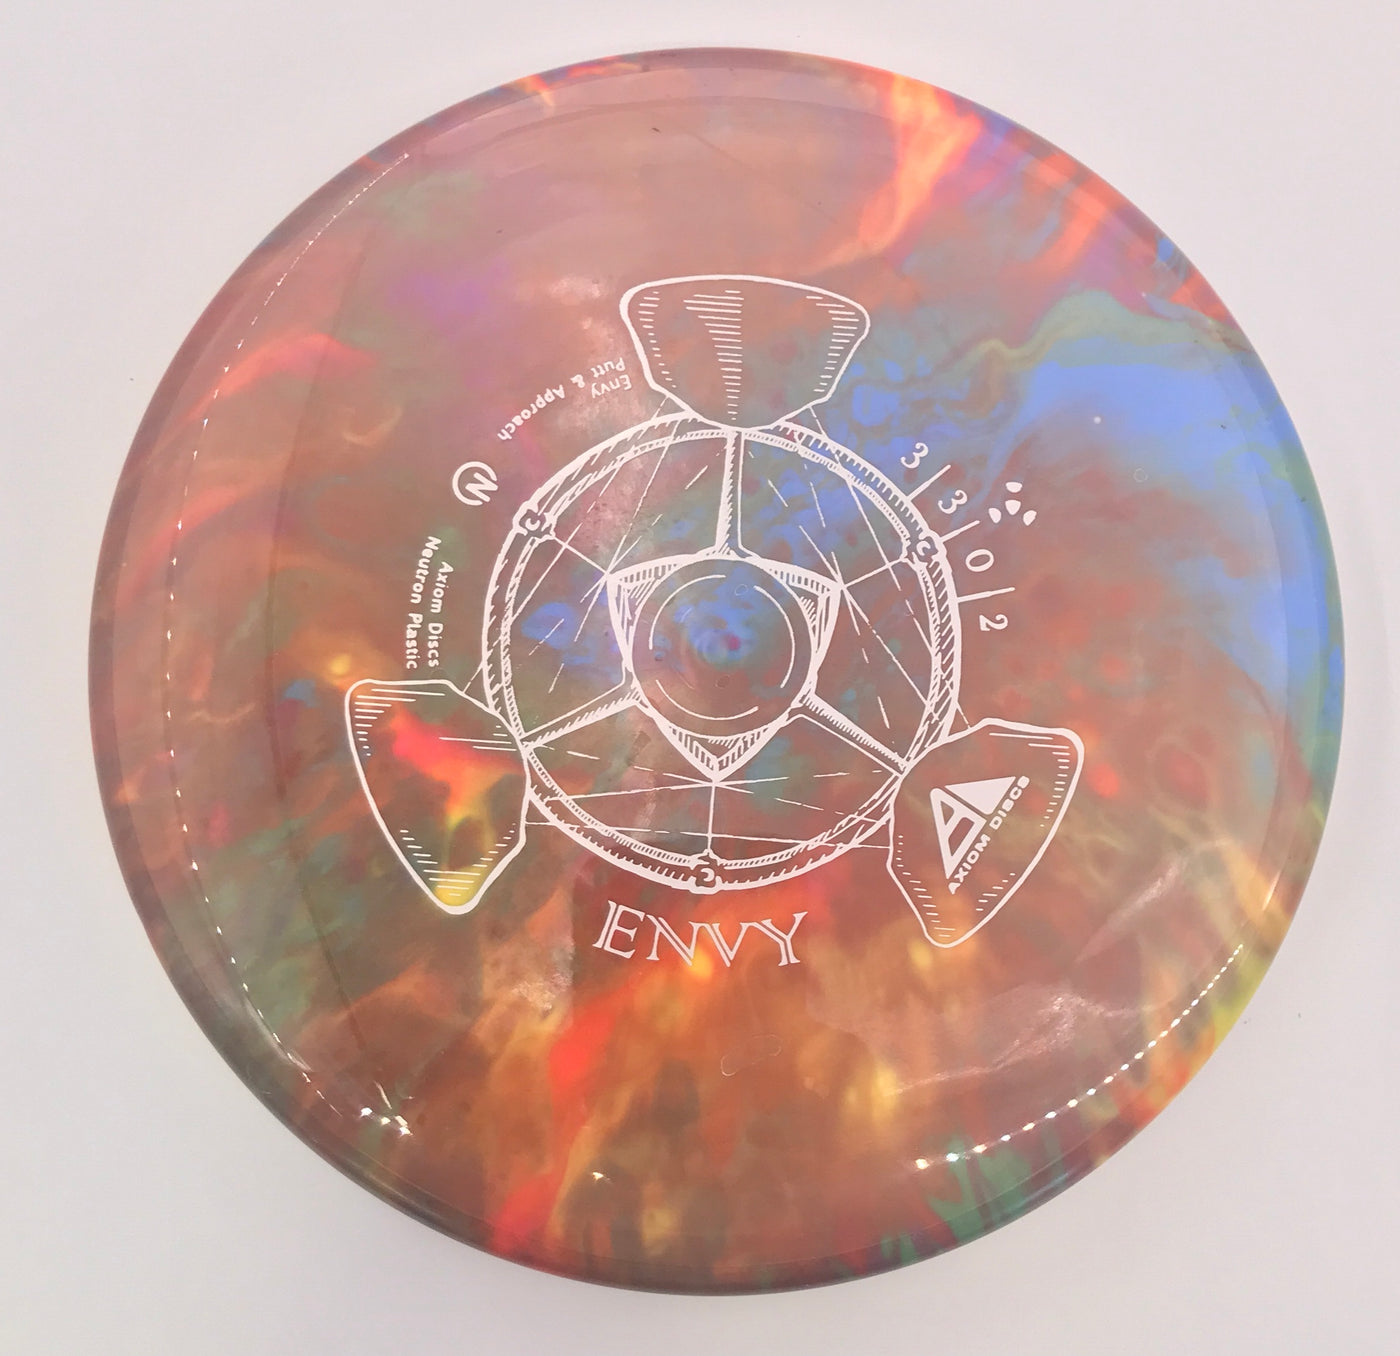 These Dyes Are Great from Disc Store Nate